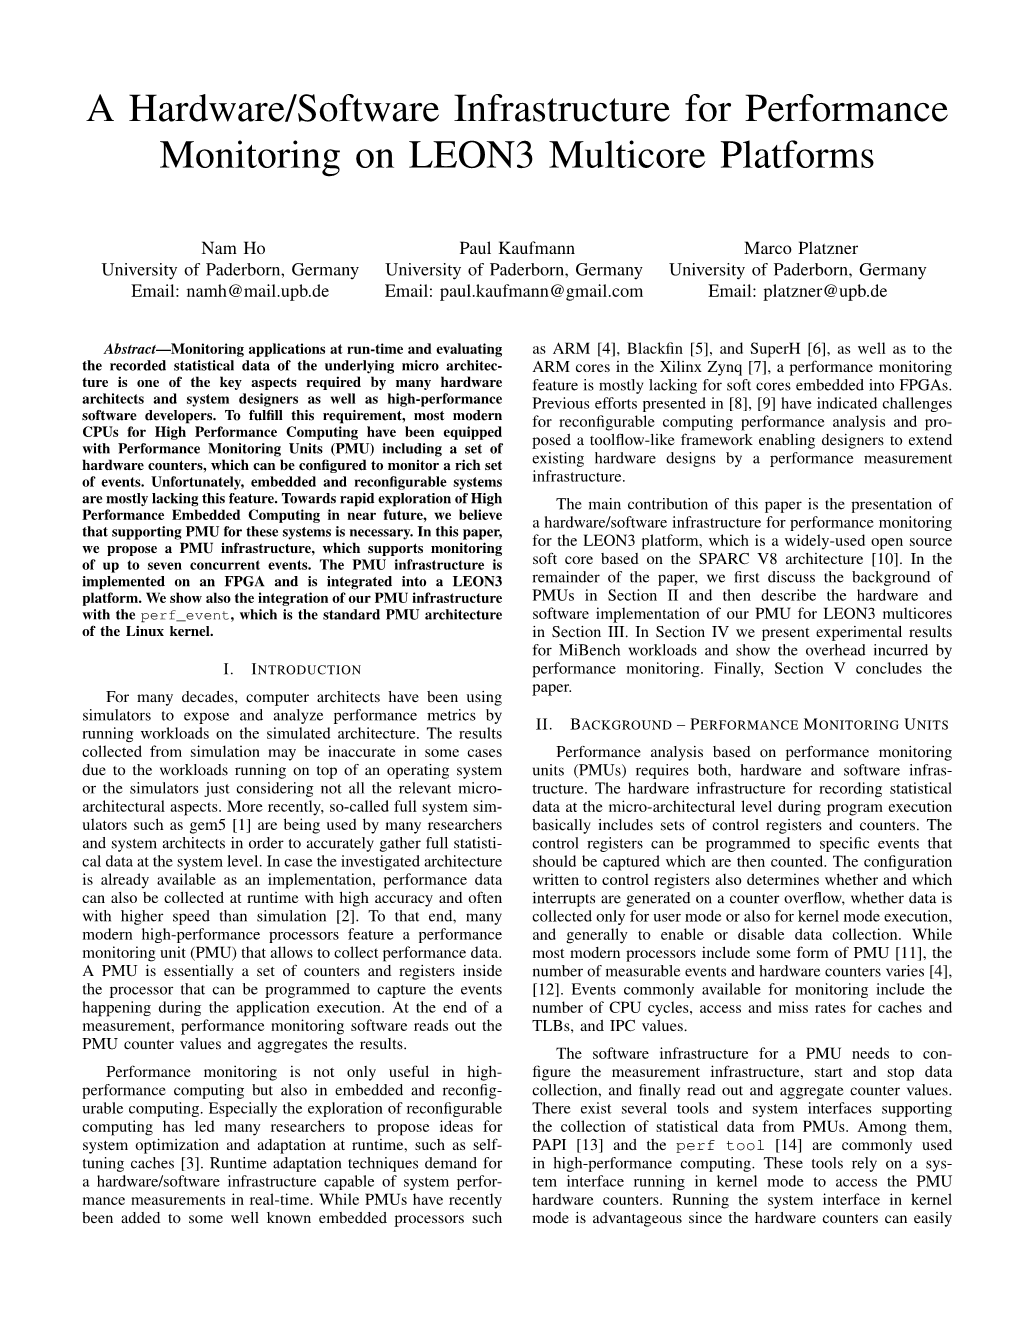 A Hardware/Software Infrastructure for Performance Monitoring on LEON3 Multicore Platforms